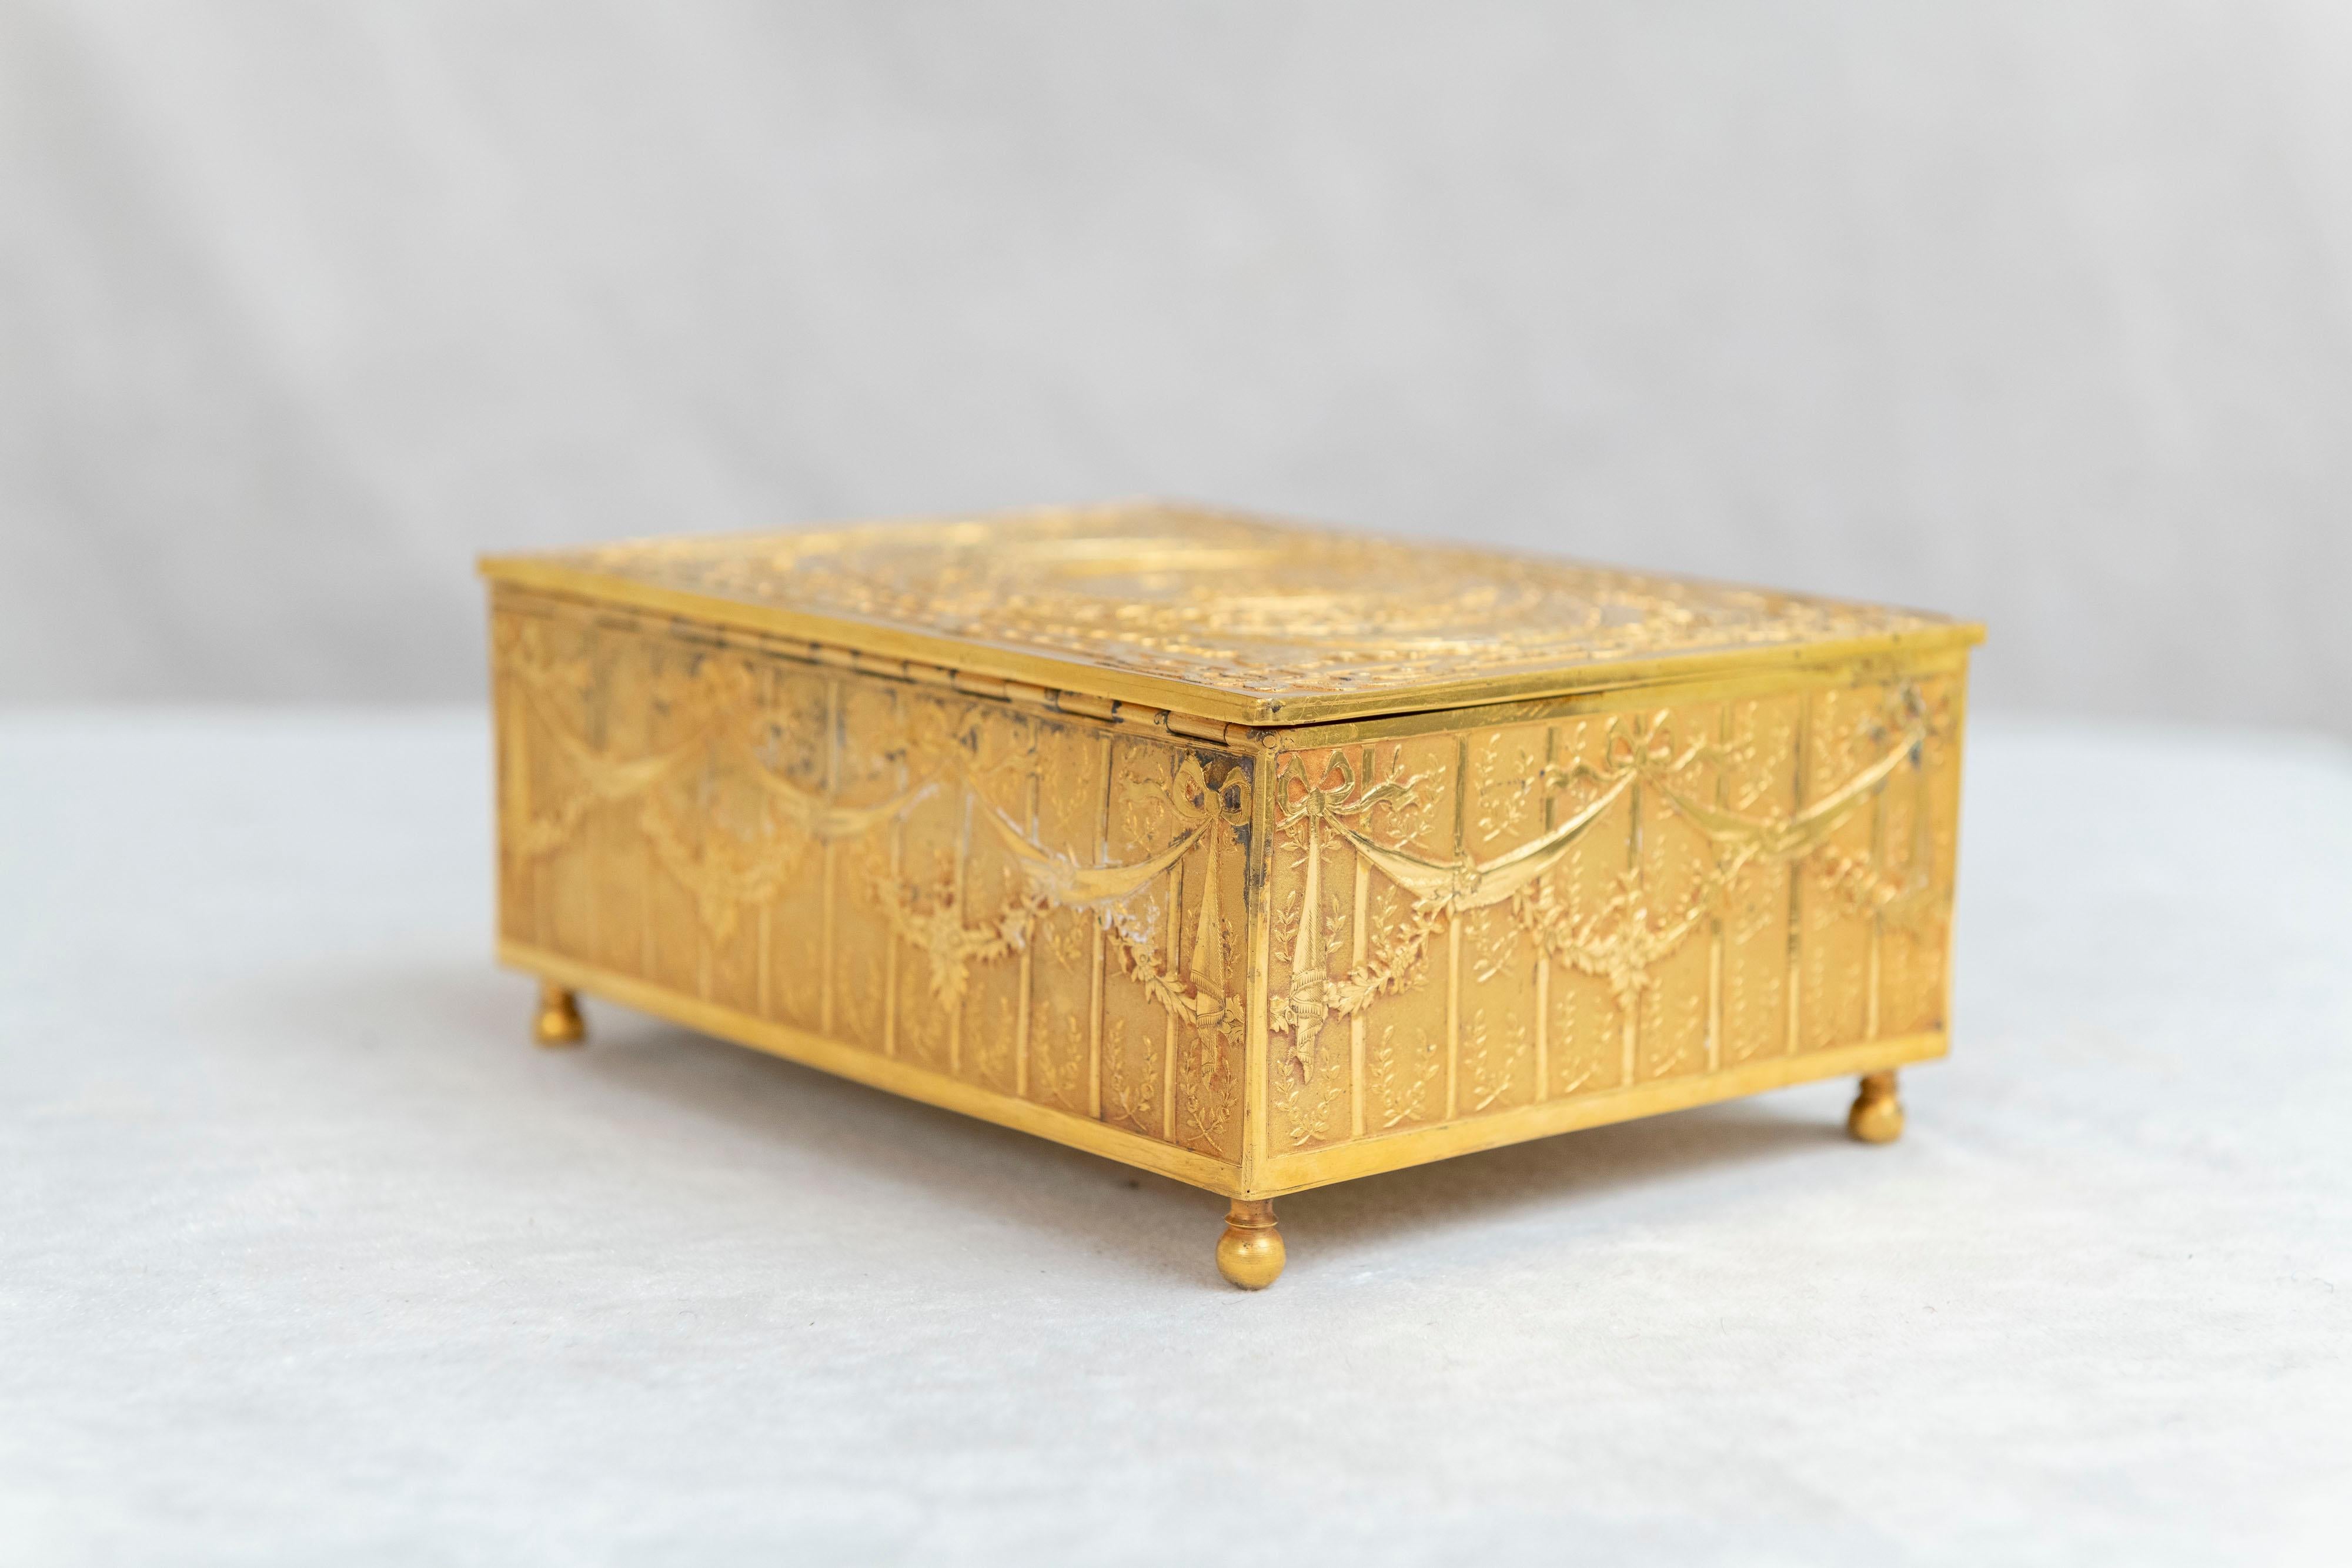 French Gilt Bronze Jewelry Box circa 1900 with Original Key Neoclassical Revival 4